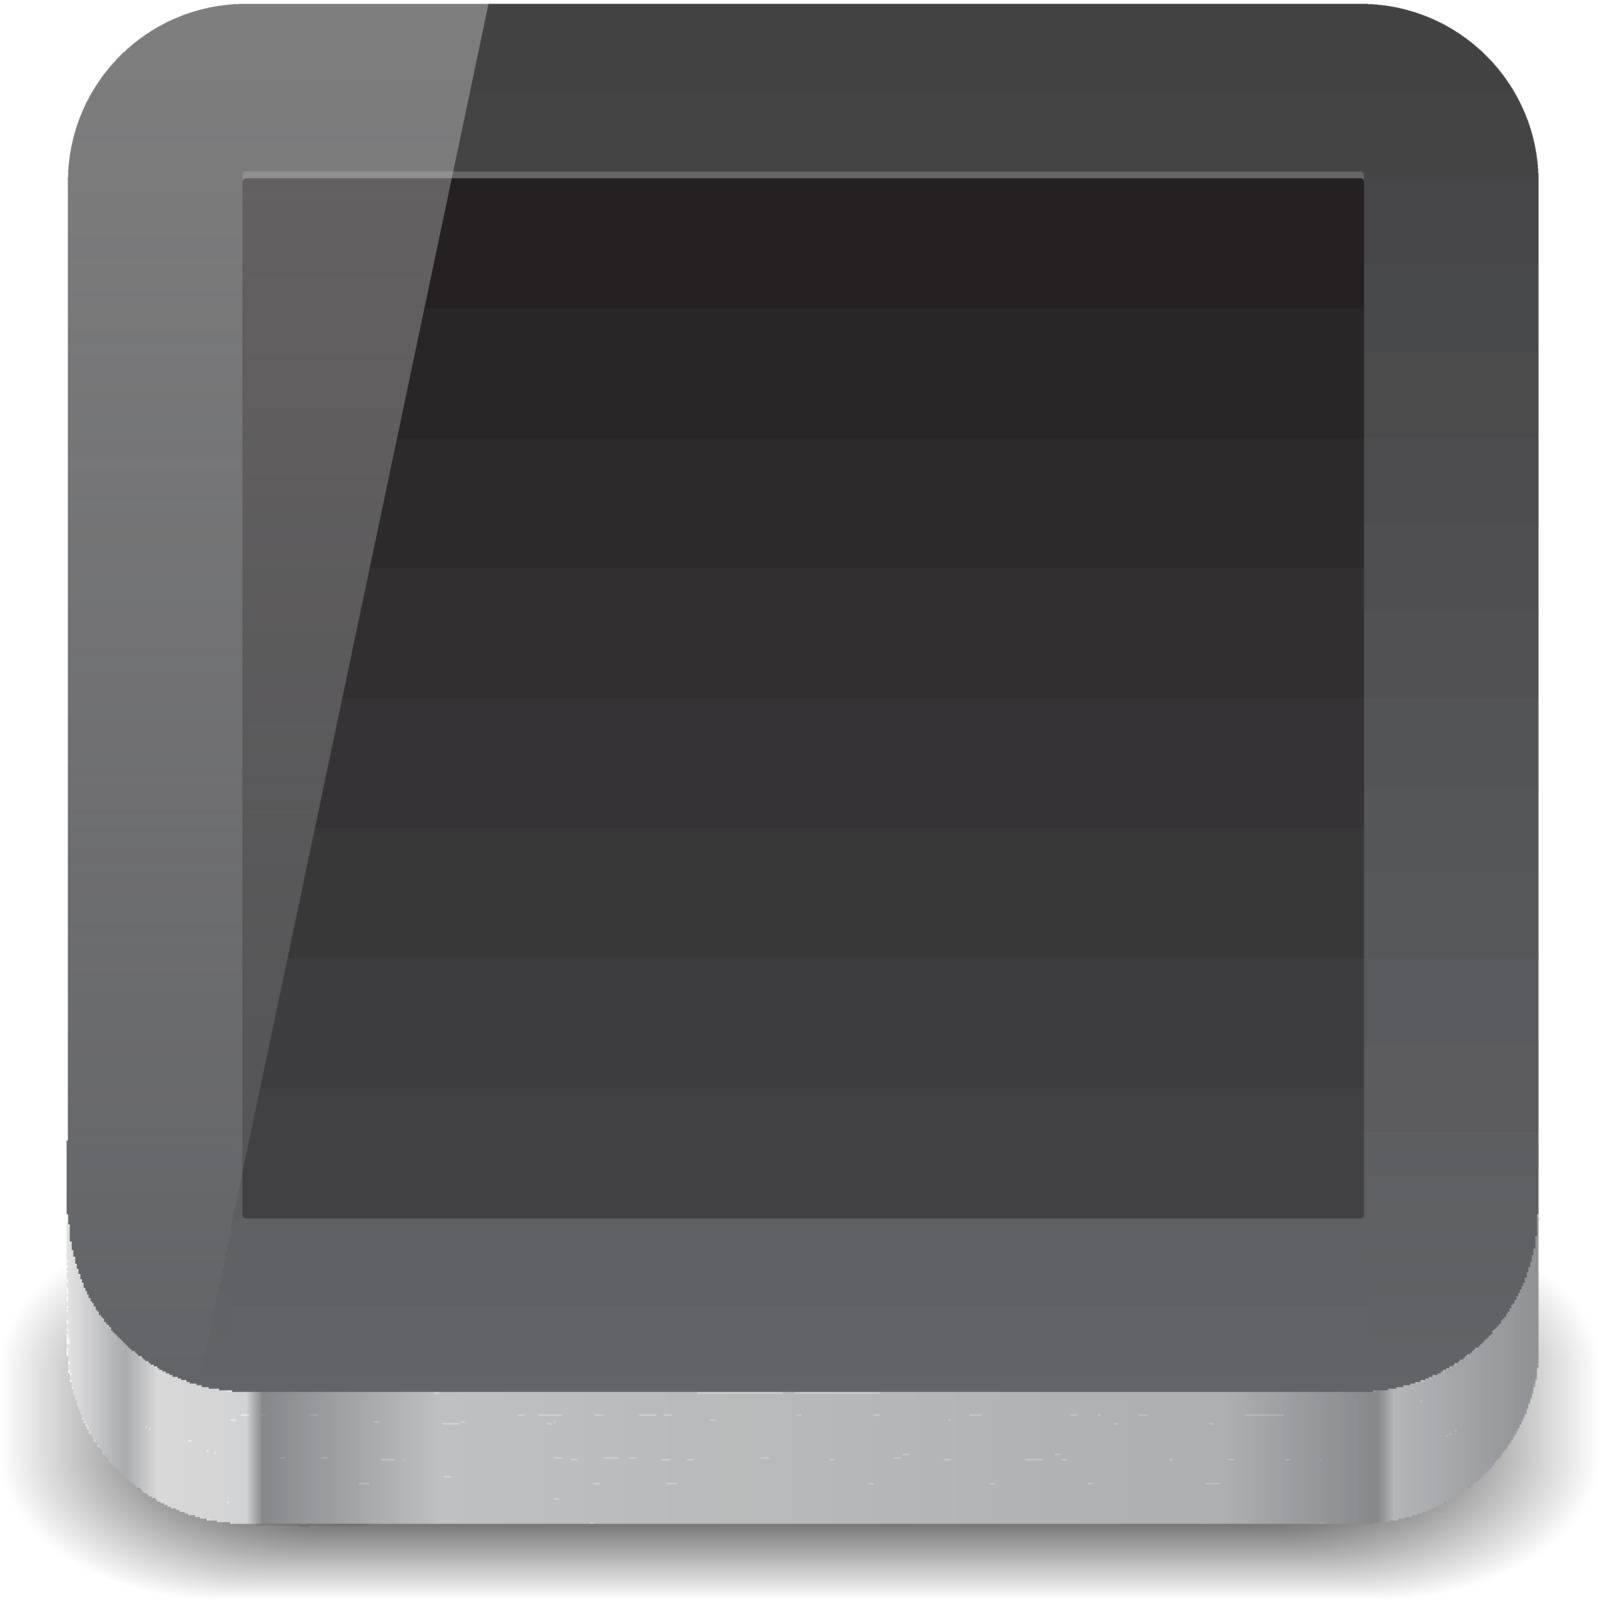 Icon for tablet computer with black display. White background. Vector saved as eps-10, file contains objects with transparency.